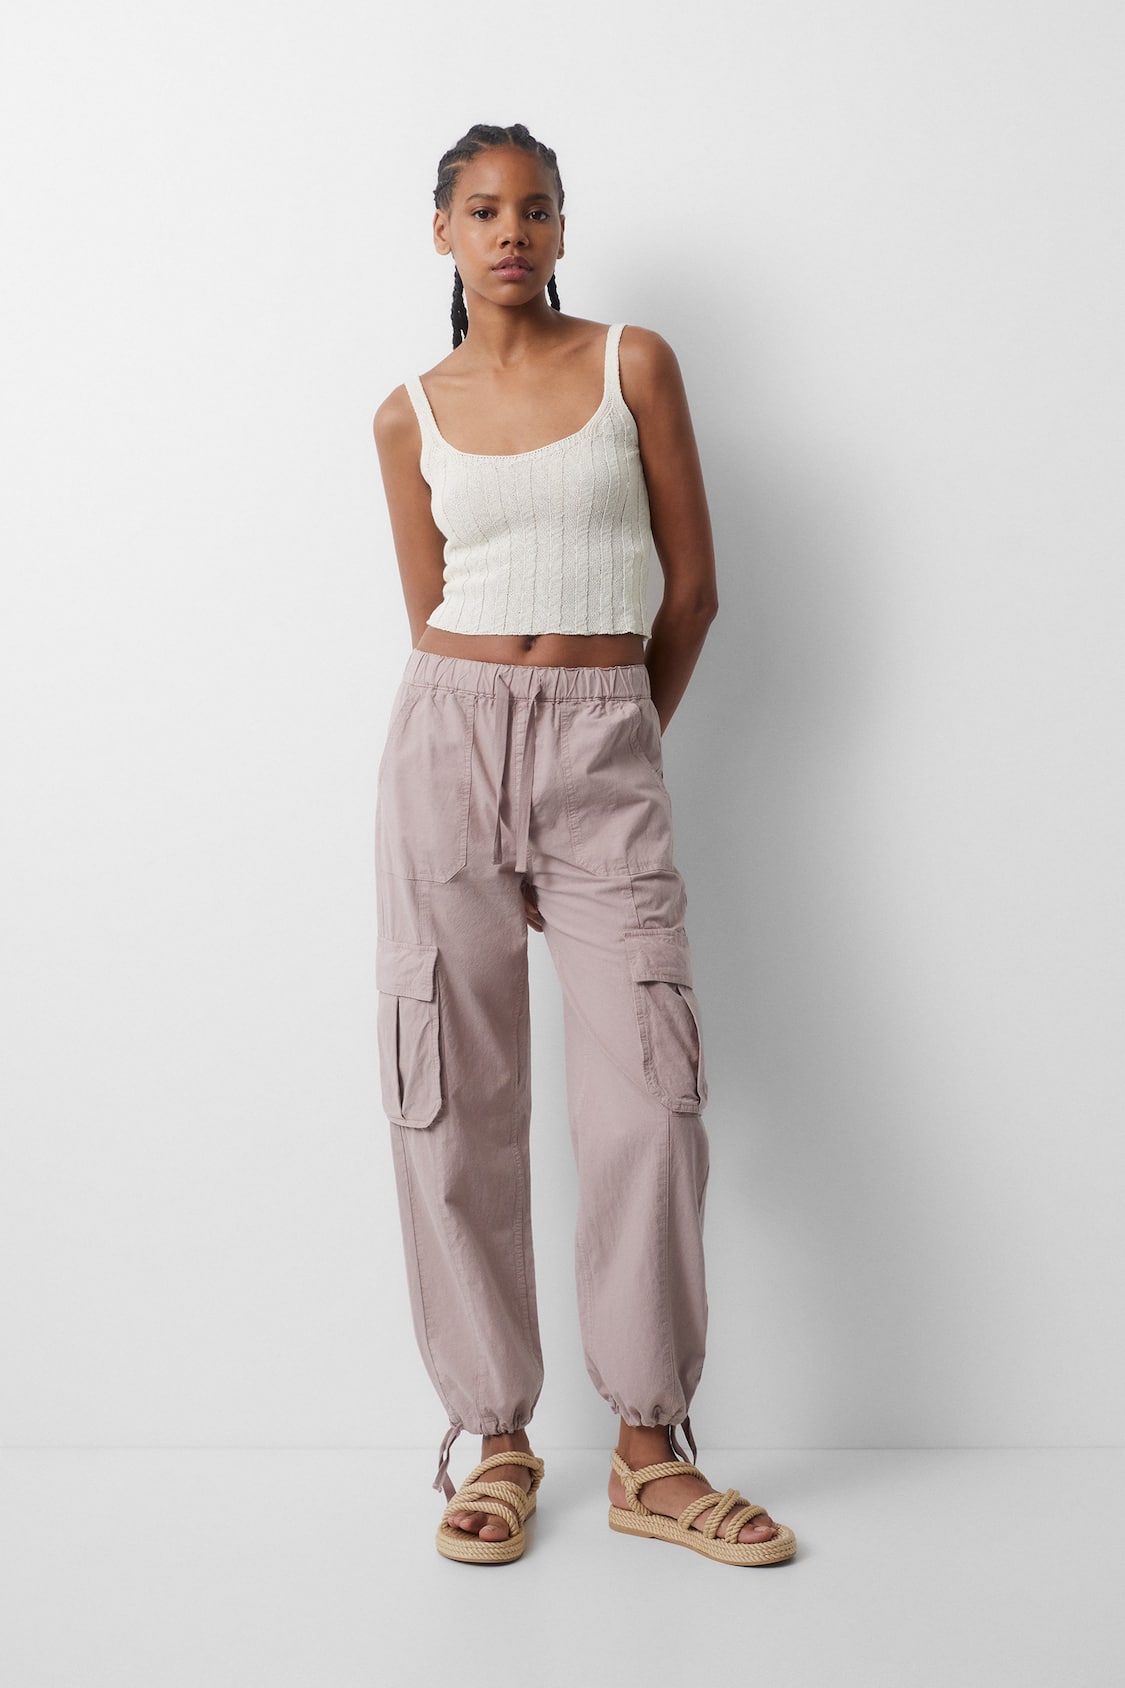 Bdg Sand Linen Multi-Pocket Cargo Pant in Beige at Urban Outfitters